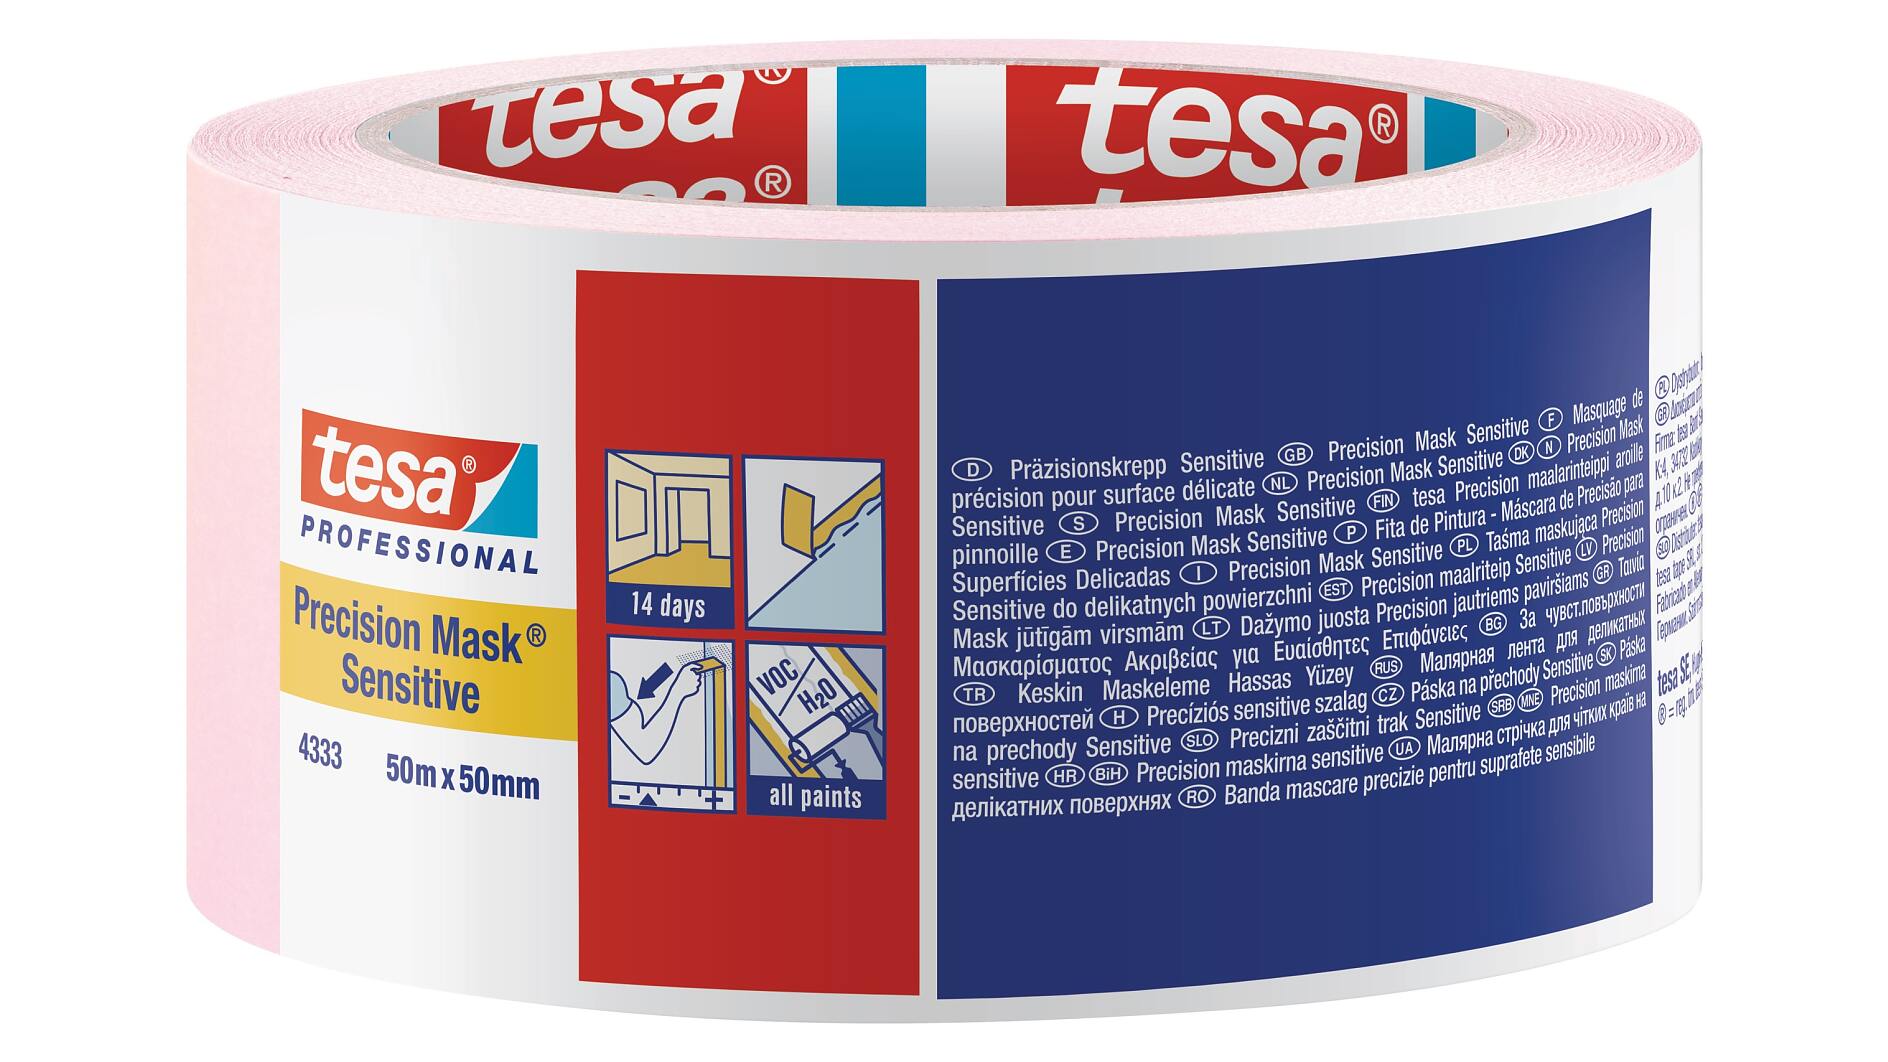 48/CS 3/4 PREM. MASK TAPE [230128] - $159.18 : , Your  Professional Tool Authority!